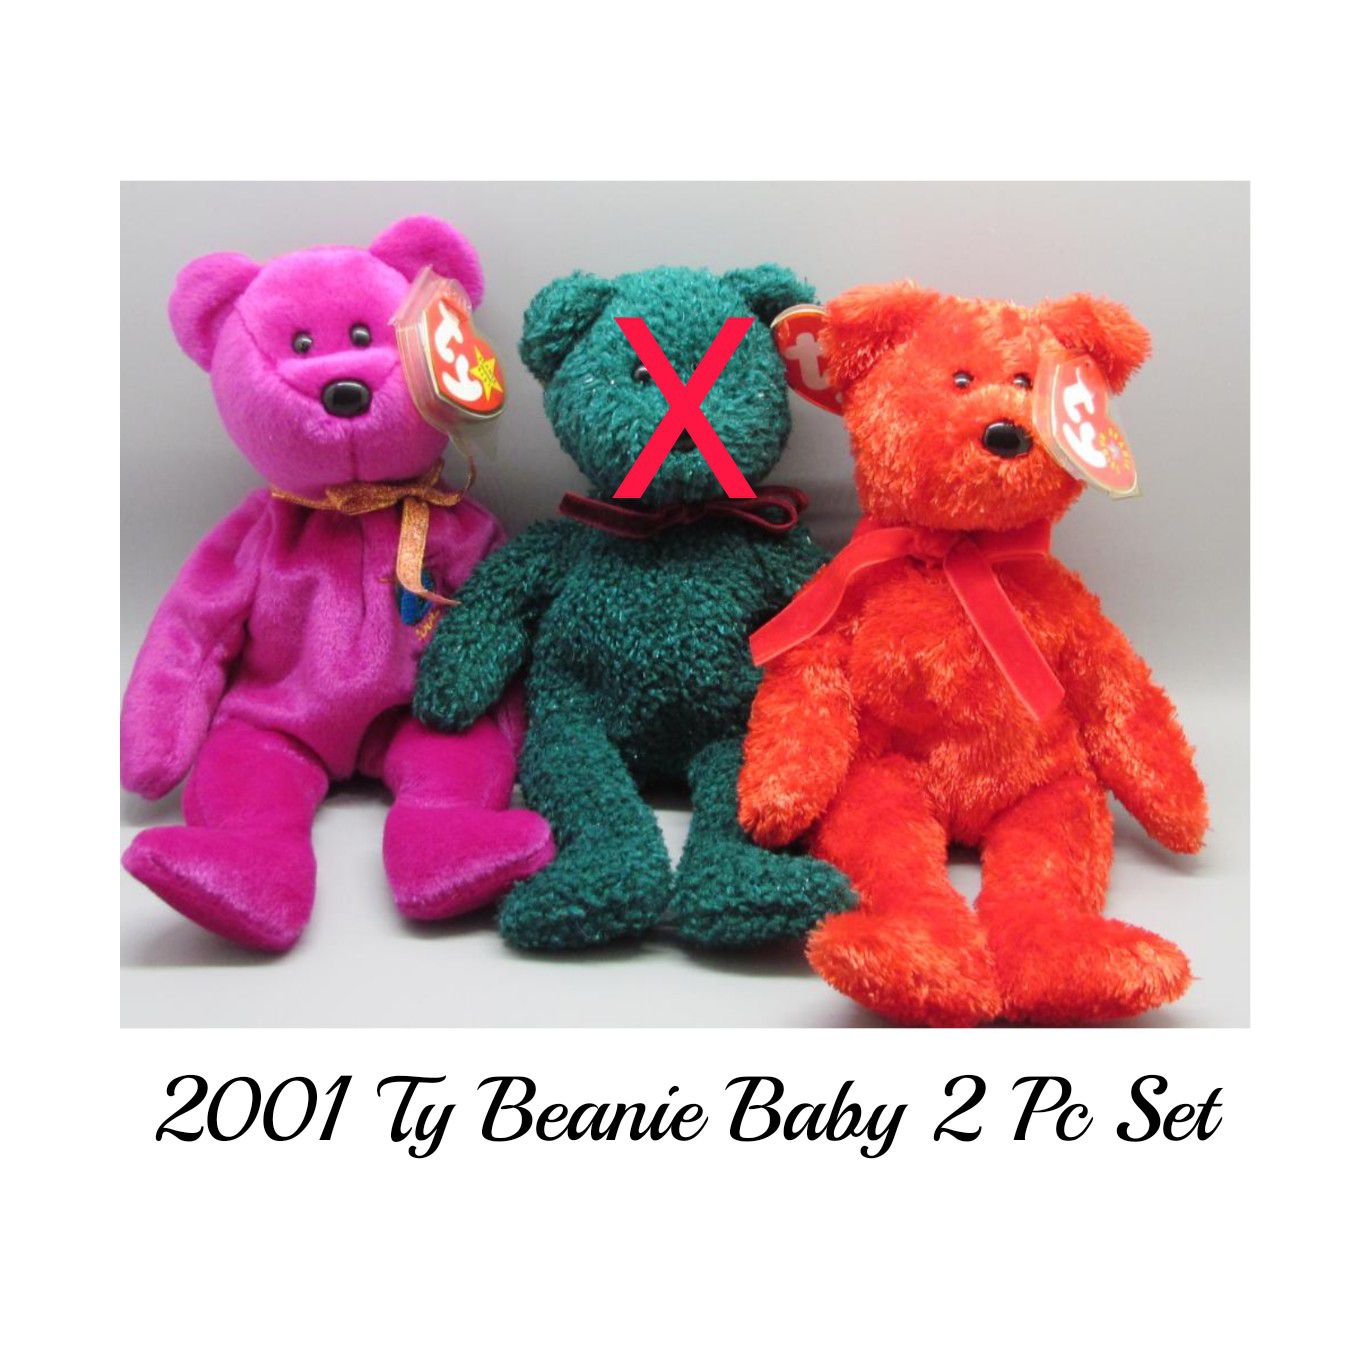 💥3 for $15💥 2001 Ty Beanie Baby 2 Pc Set. SHIPPING ONLY 😉